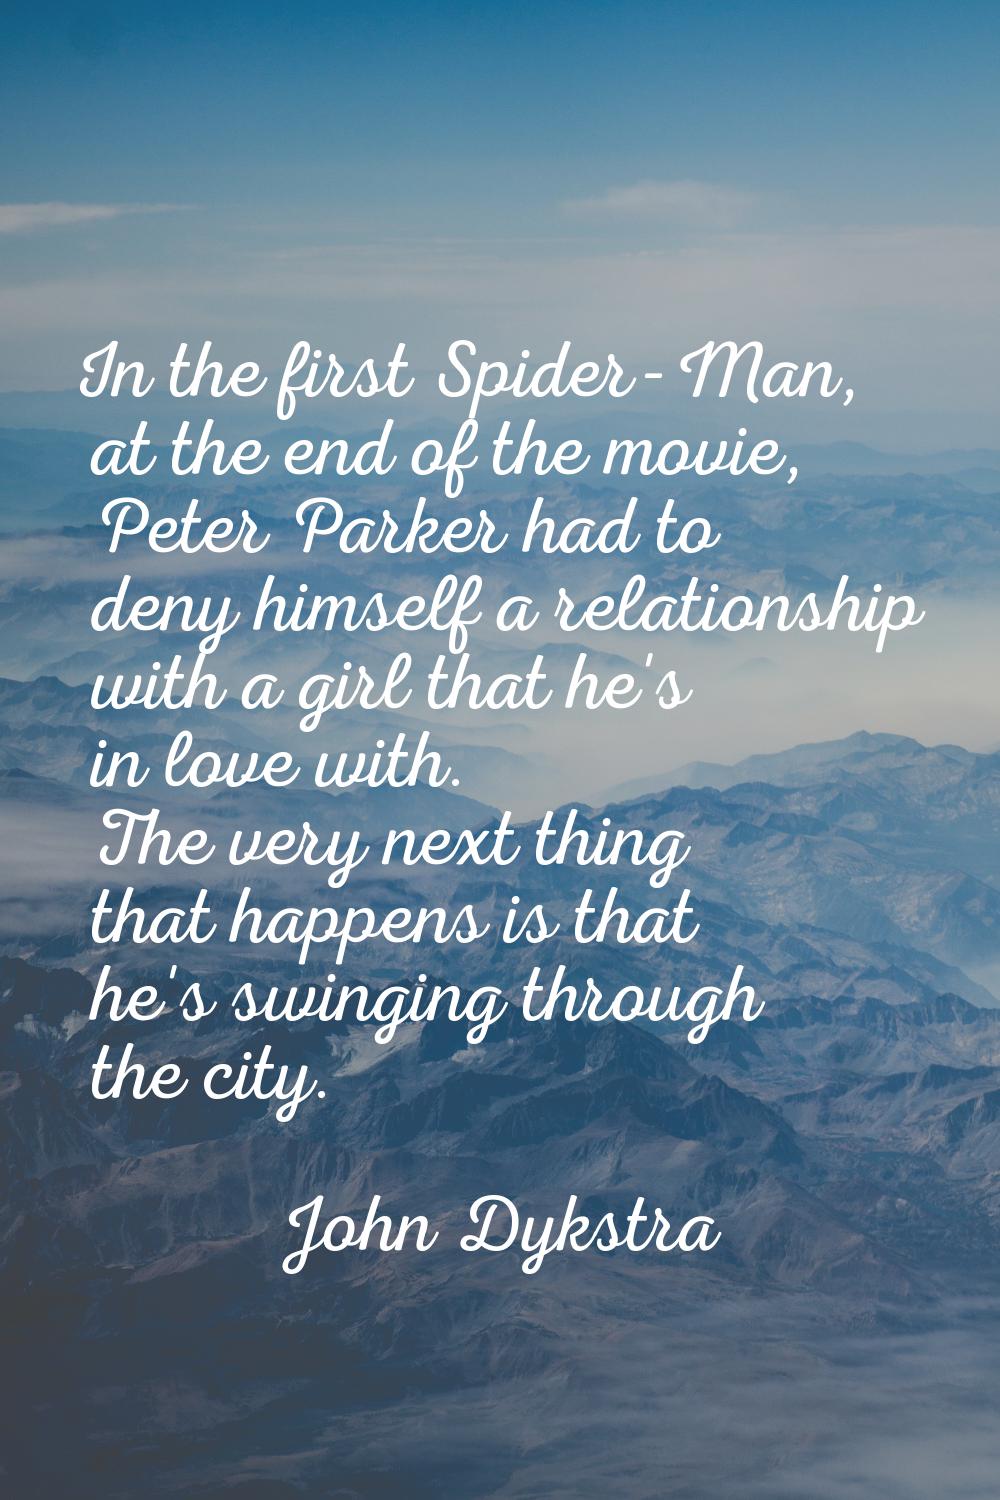 In the first Spider-Man, at the end of the movie, Peter Parker had to deny himself a relationship w